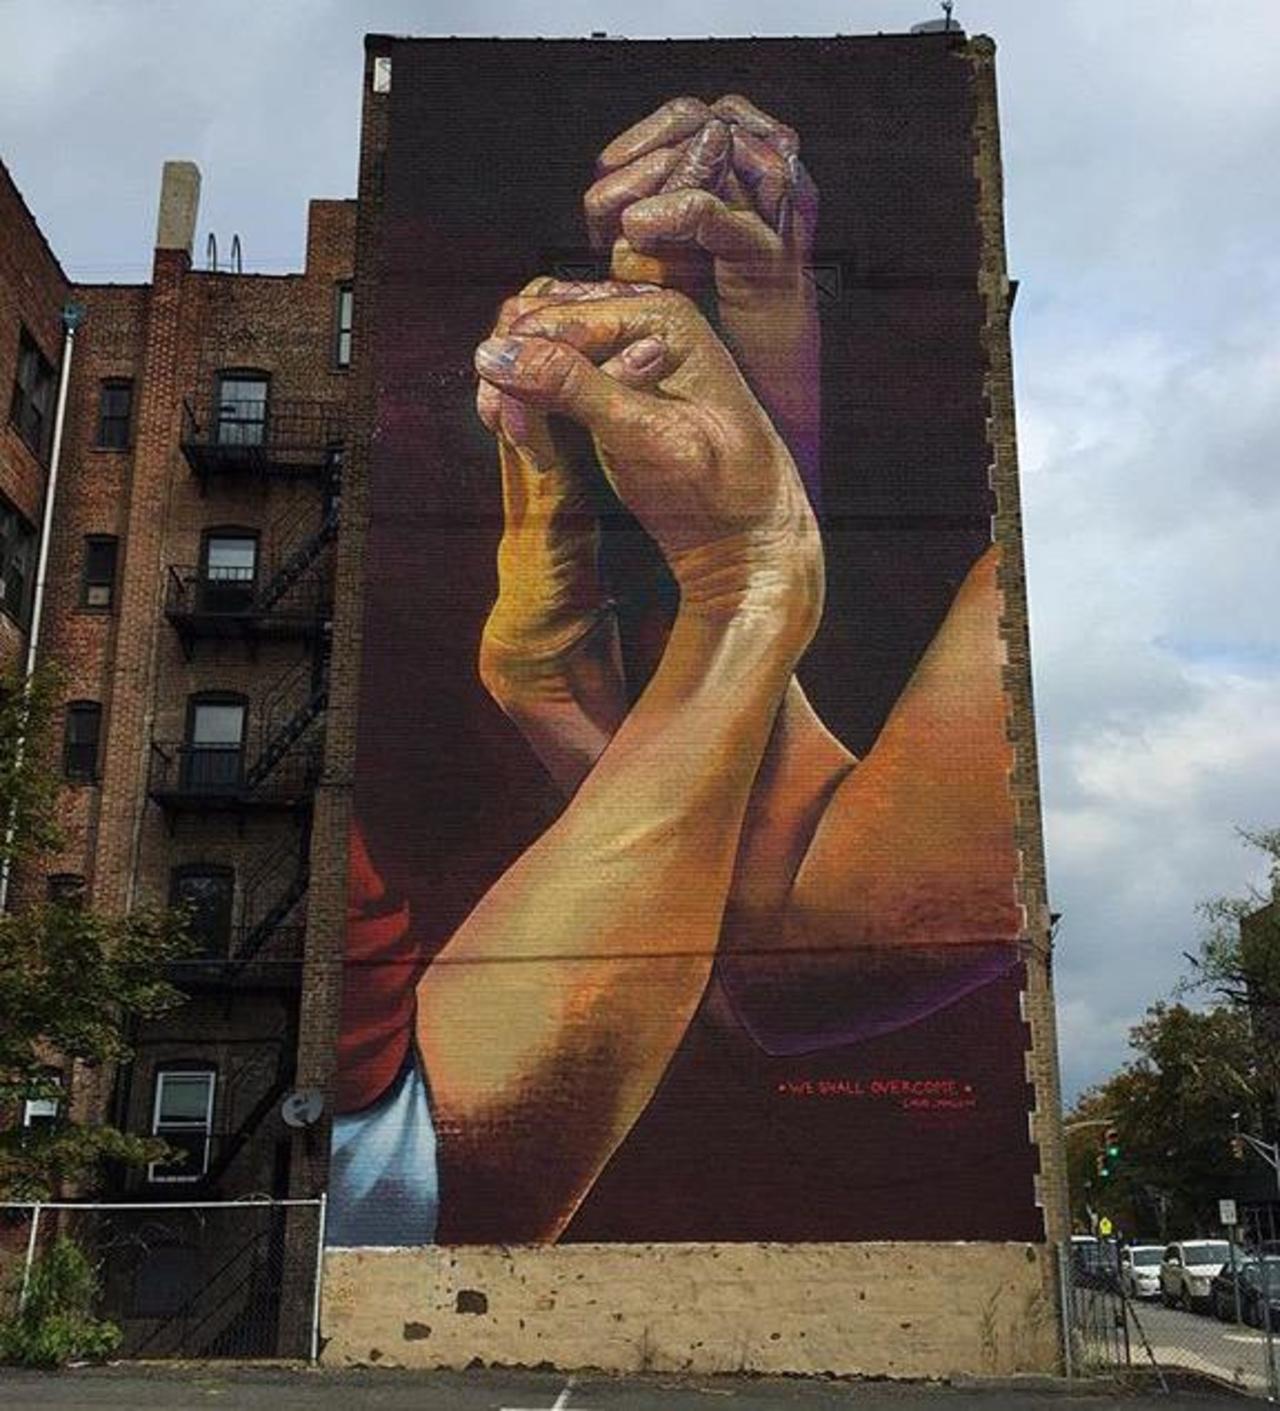 New Street Art by CaseMaclaim in Jersey City for the TheBKcollective 

#art #graffiti #mural #streetart http://t.co/LXD64YBNDZ